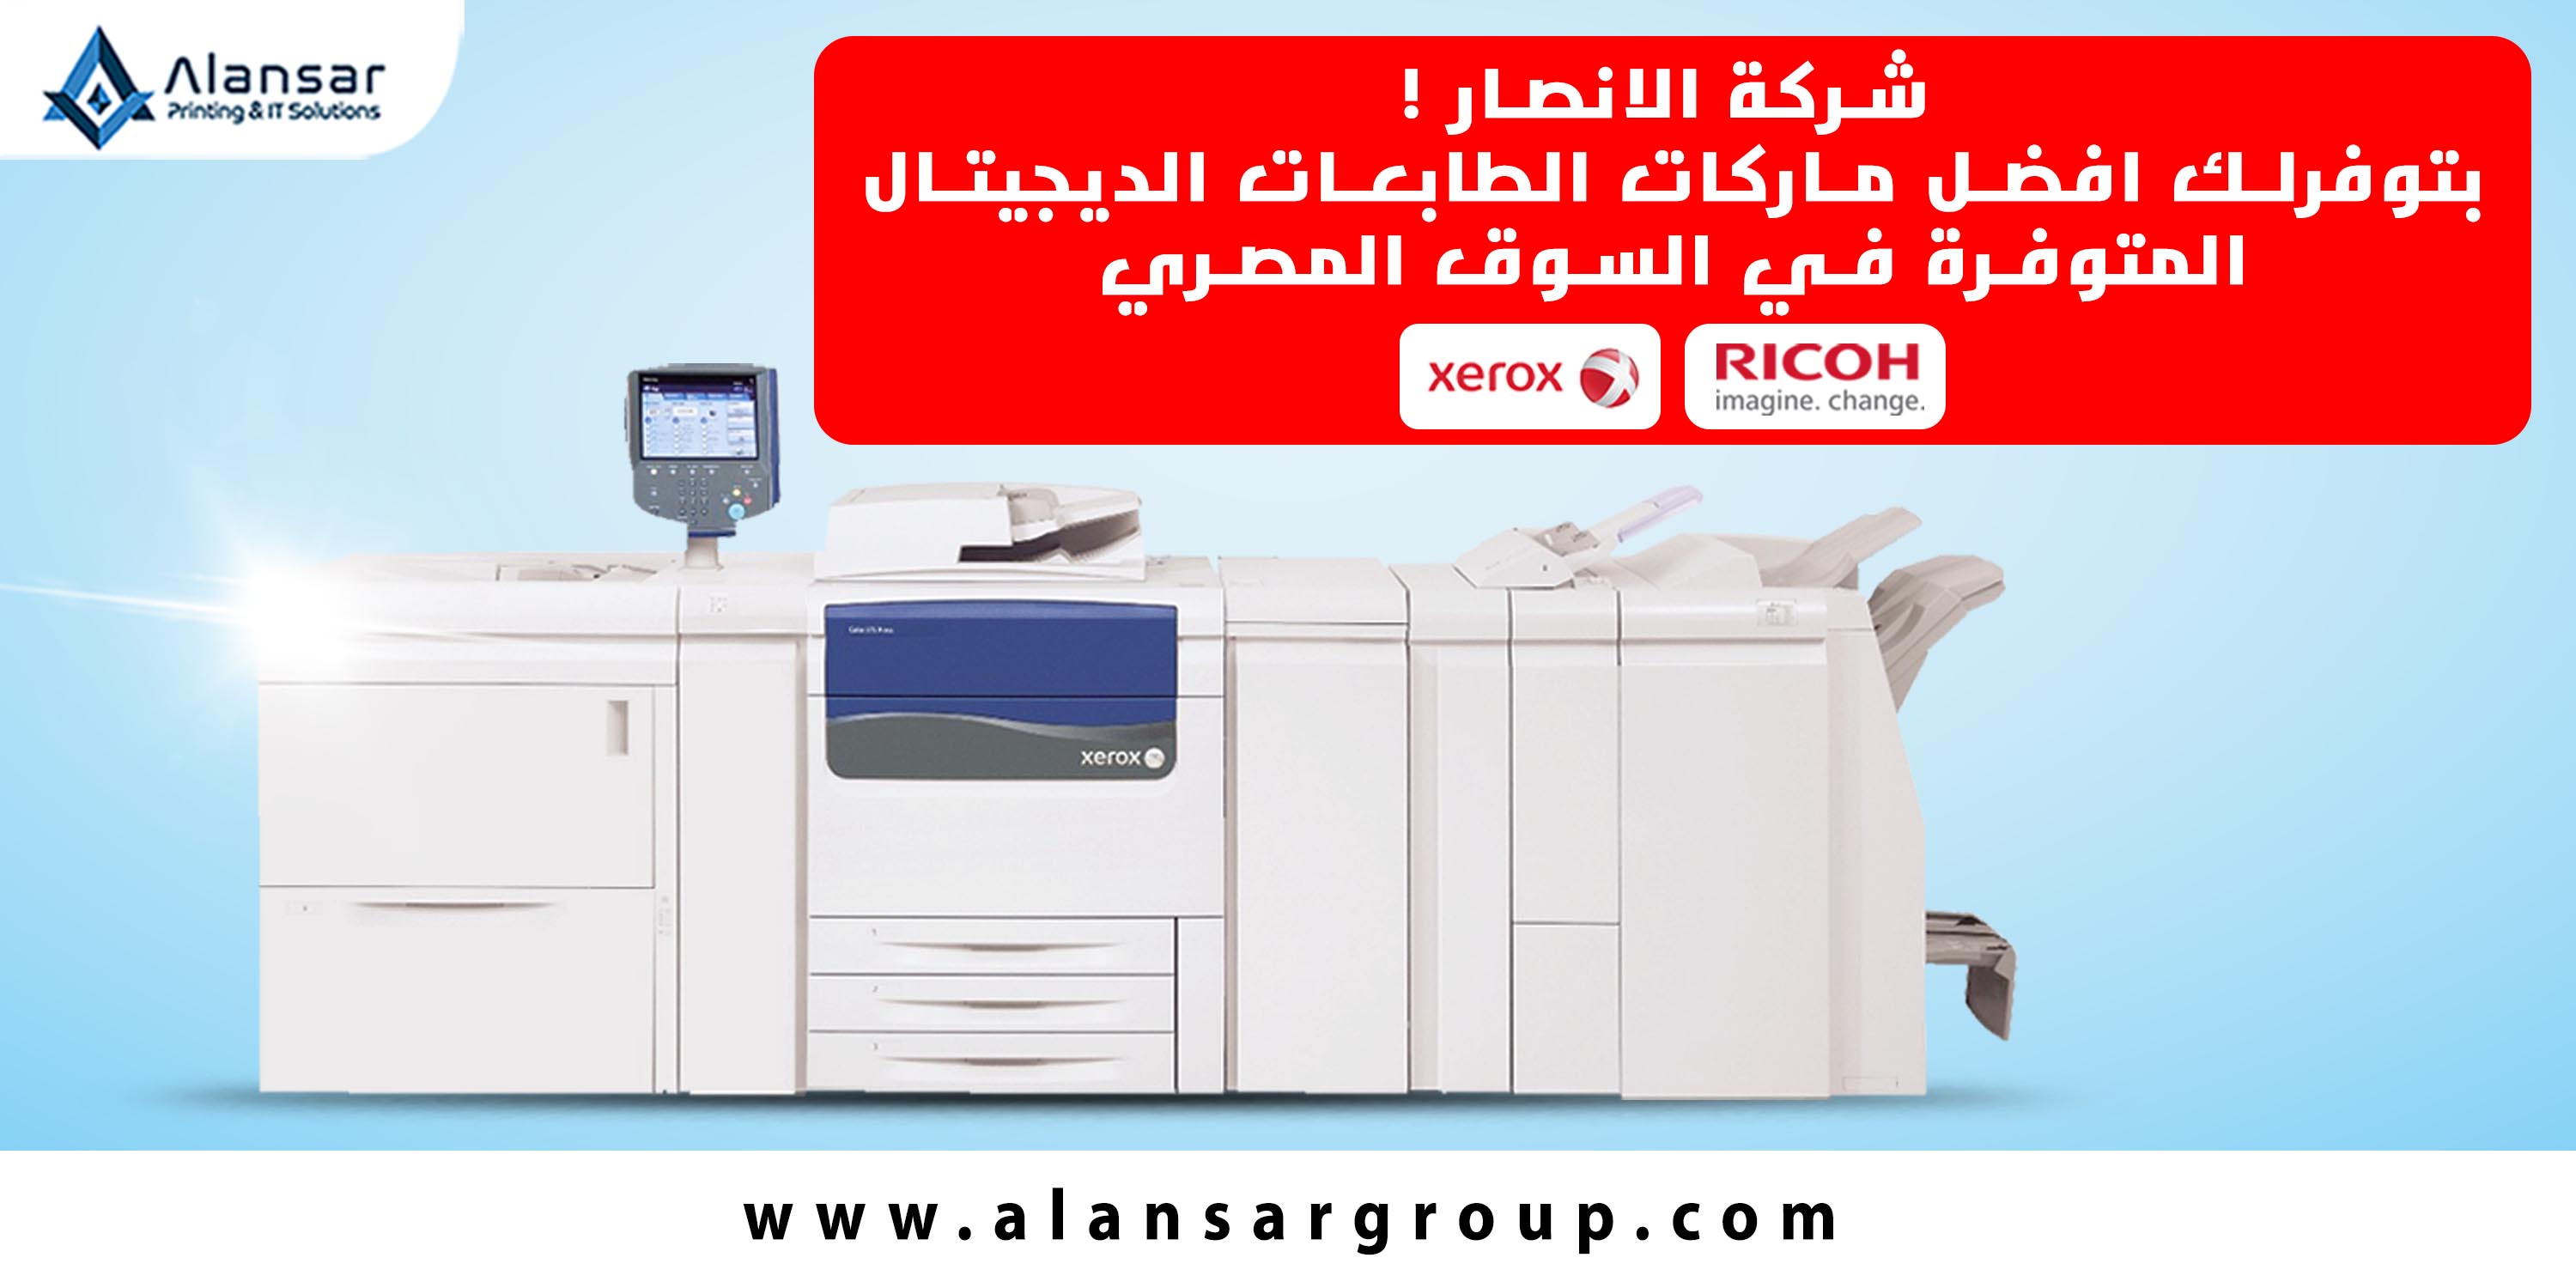 The best brands of digital printers in the Egyptian market 2023